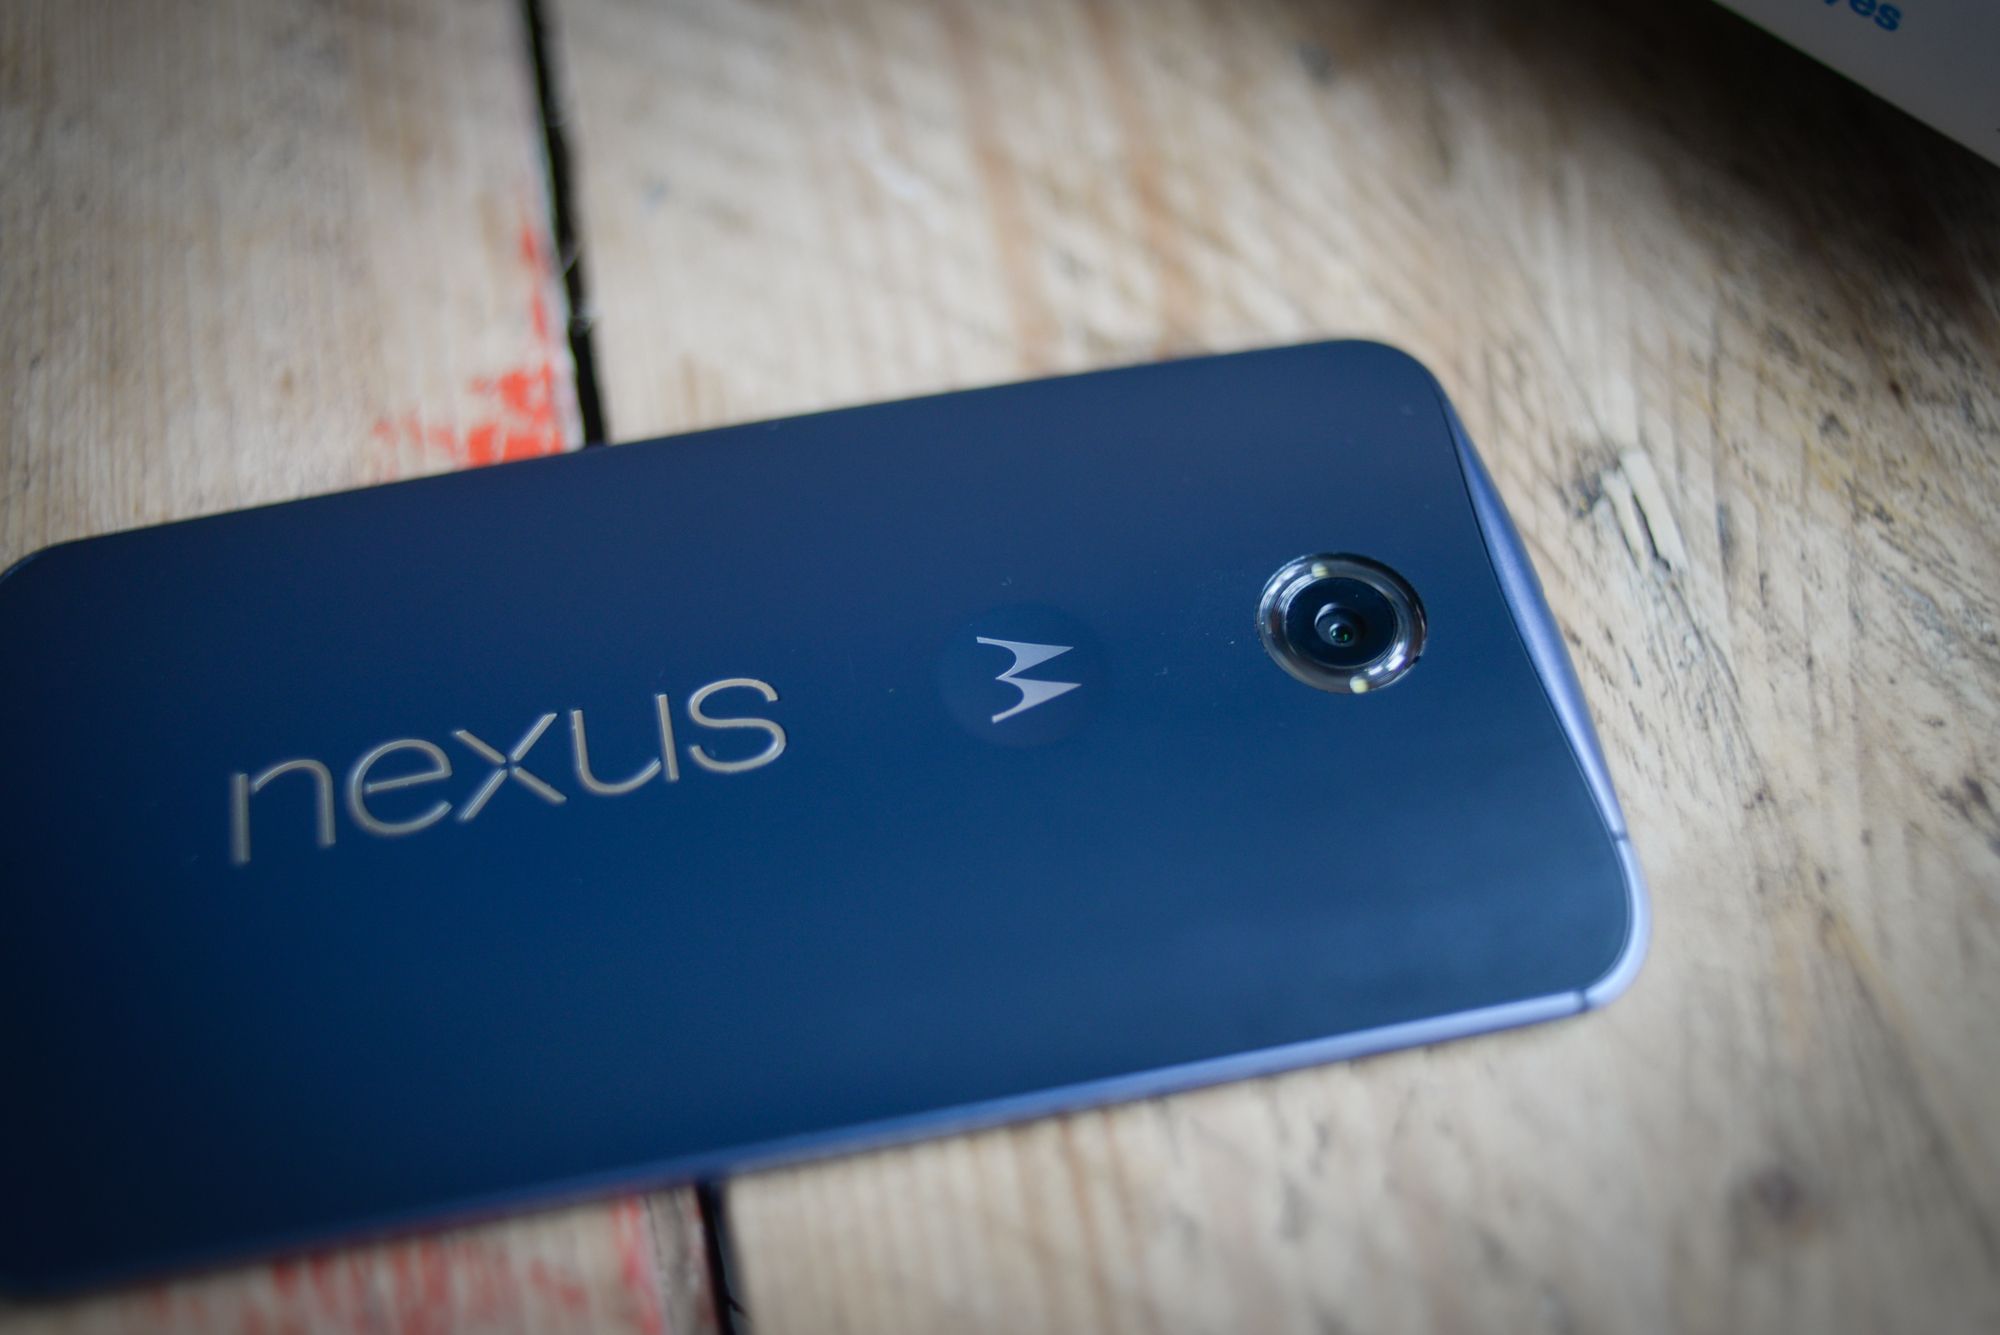 Why Motorola's Nexus 6 is Android at its best